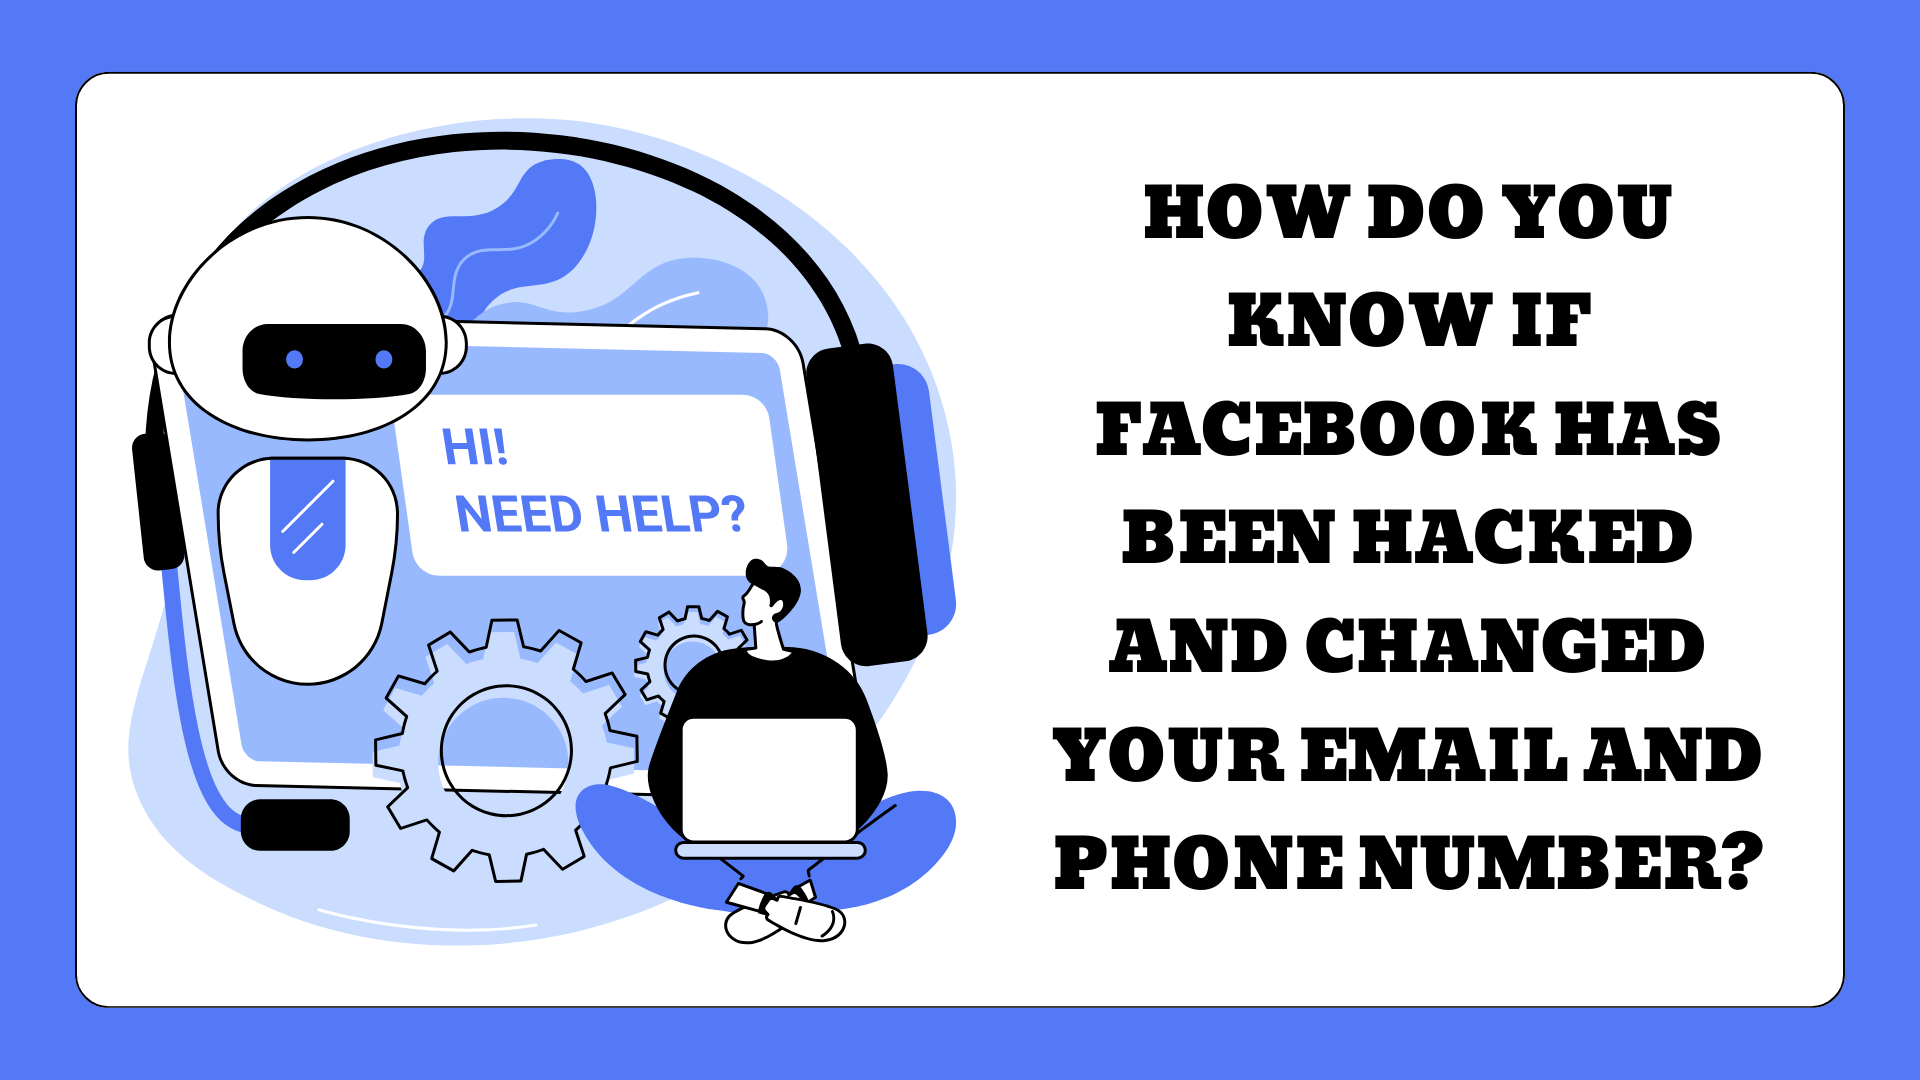 How to retrieve a hacked Facebook account and change email and phone number